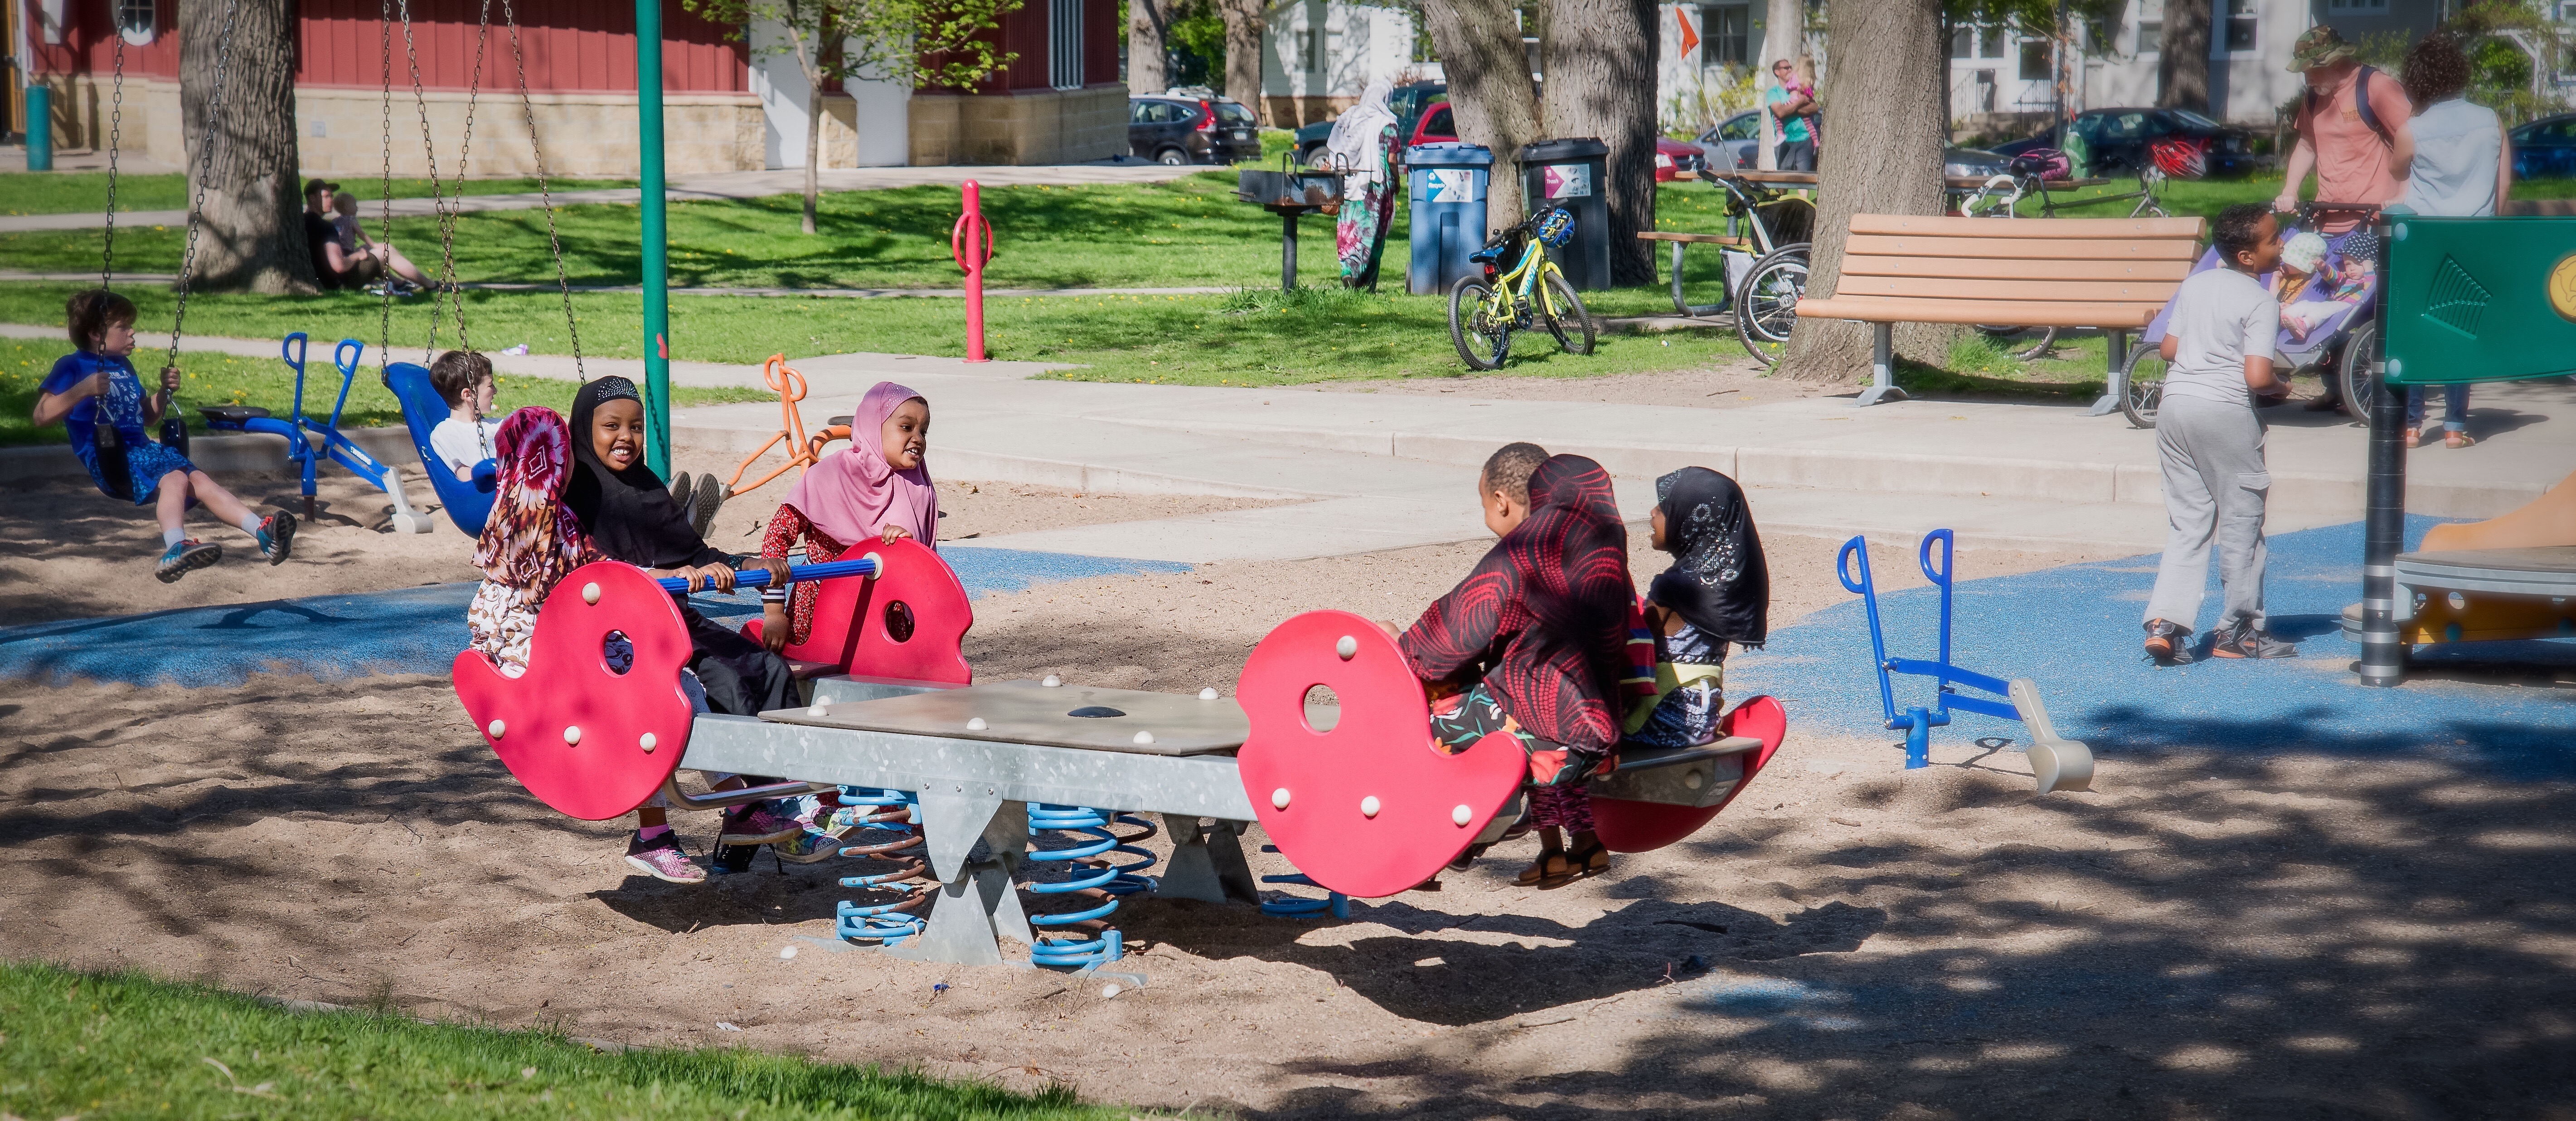 What Truly Makes Minneapolis Parks World Class?